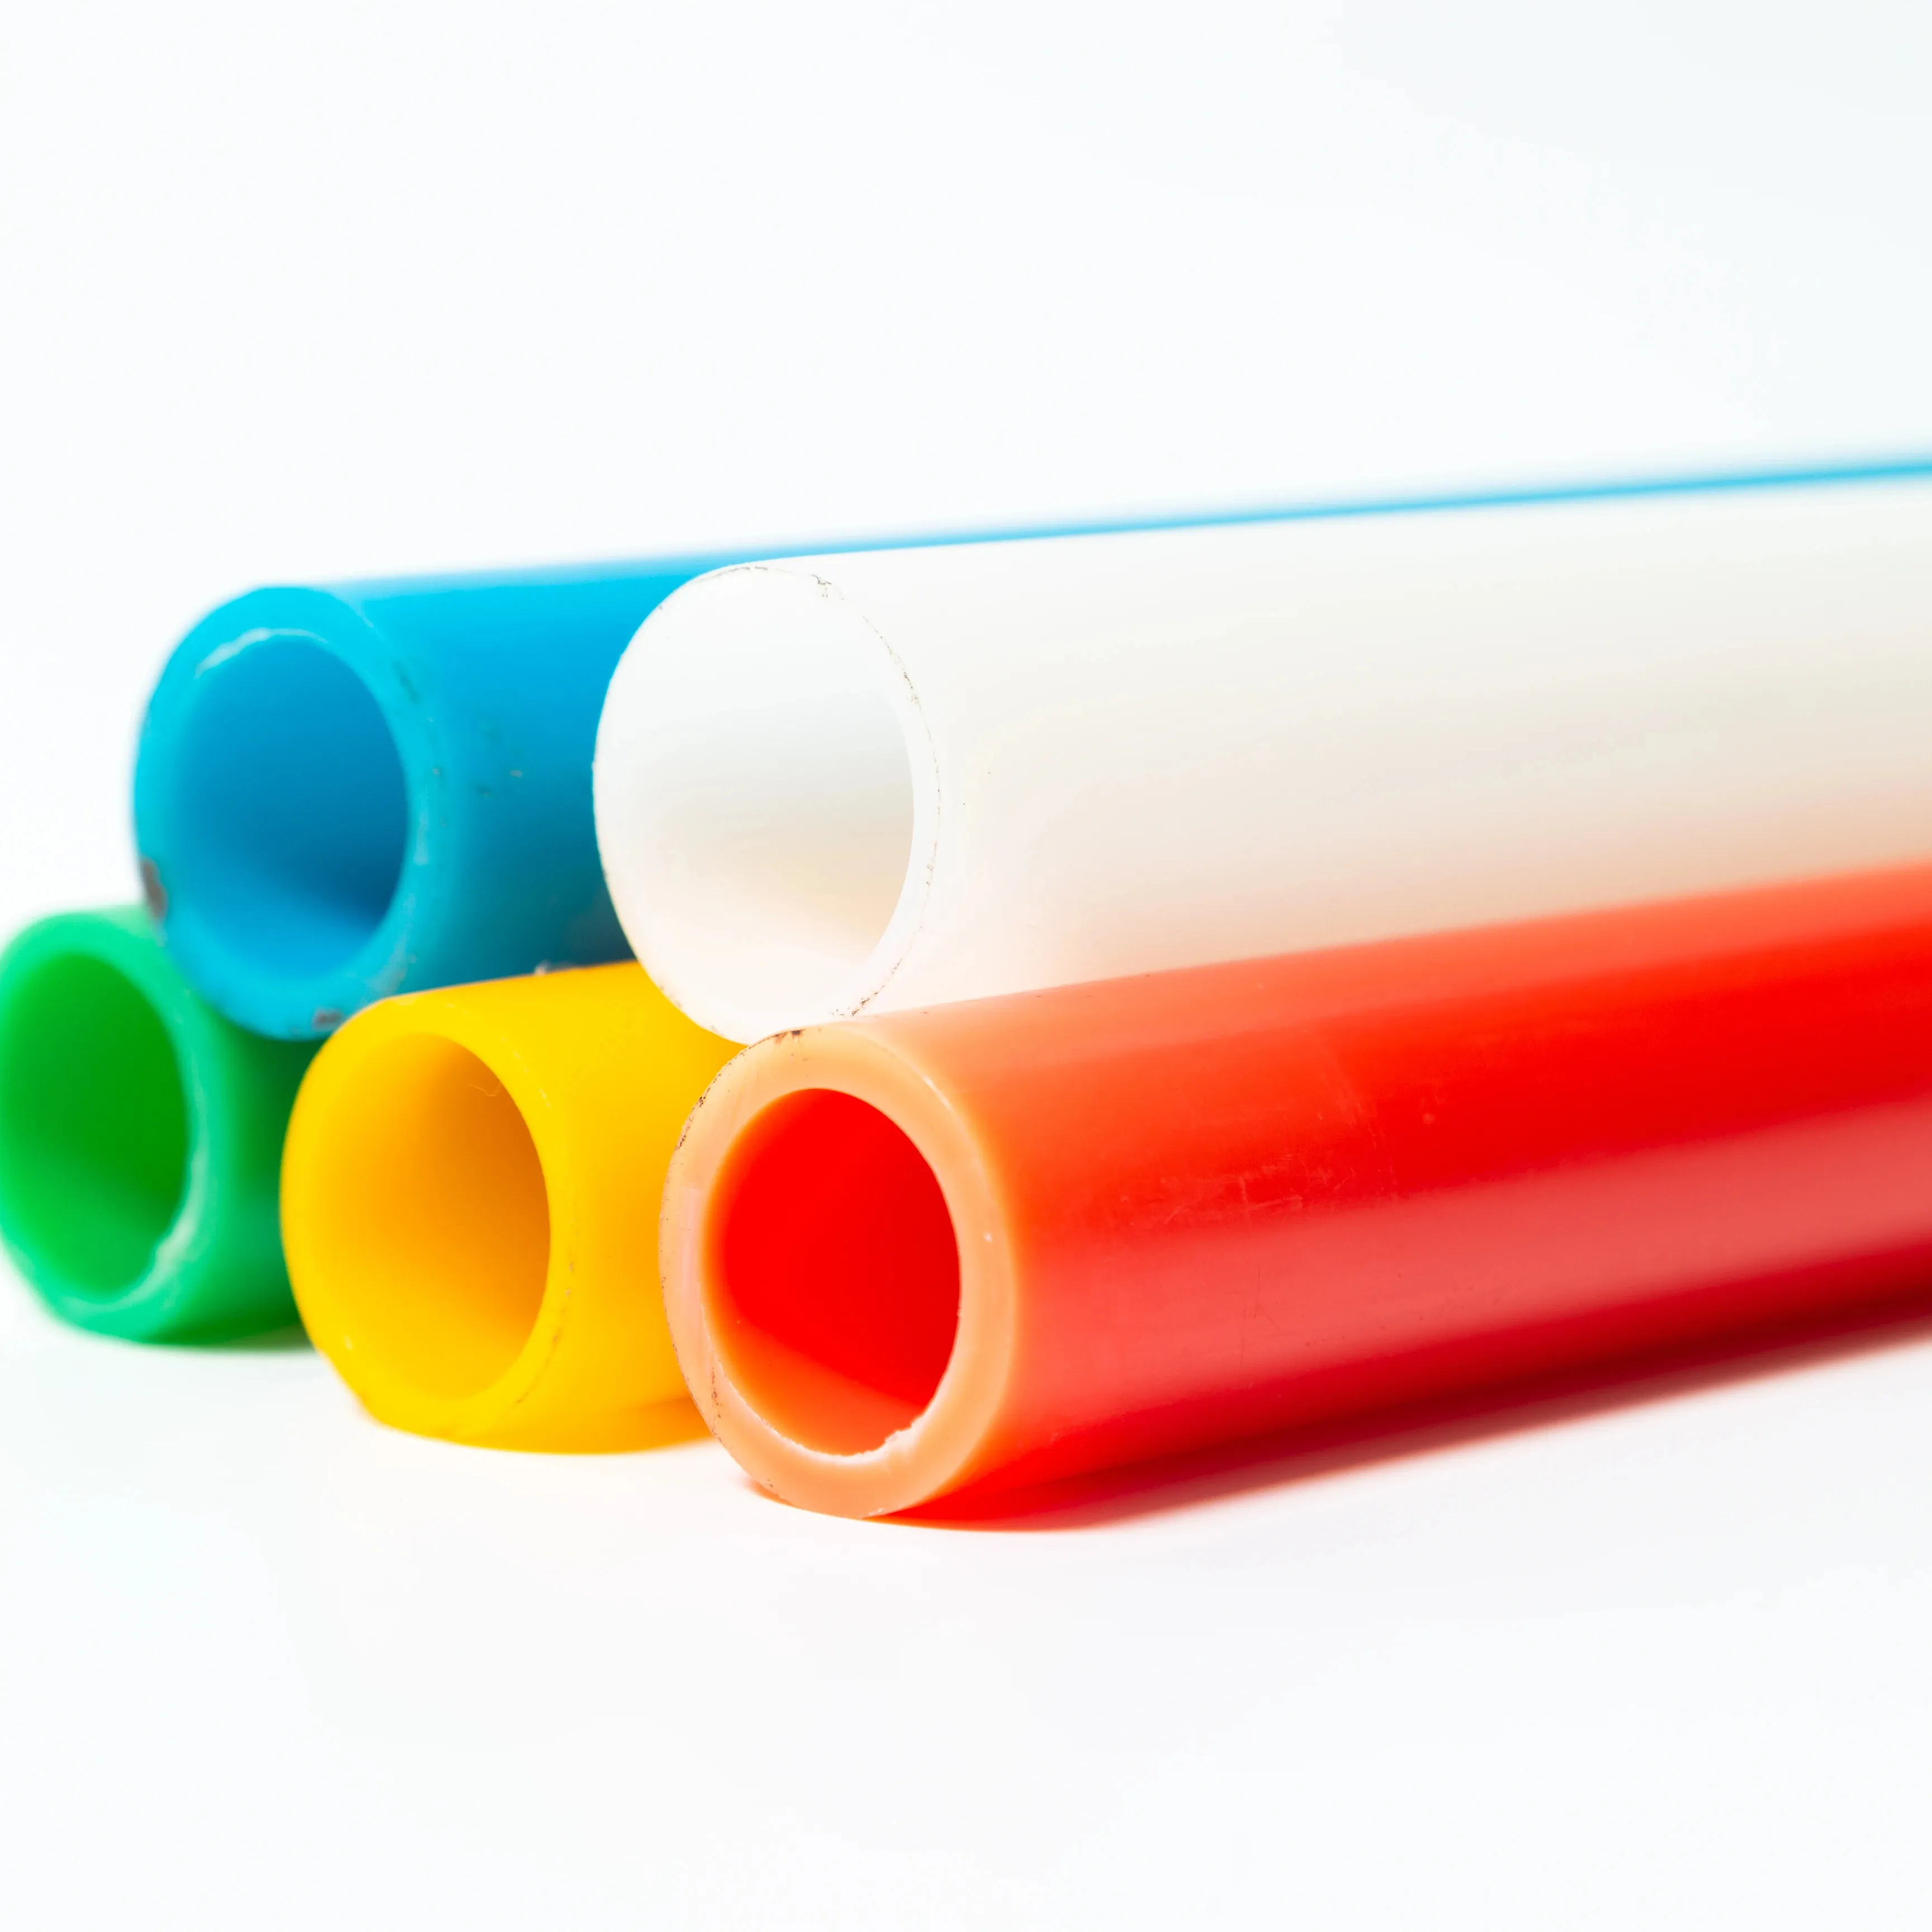 PPR cold water elbow Polypropylene PPR Tubes Water Distribution Pipes PPR Pipes and Fittings for Hot and Cold Water